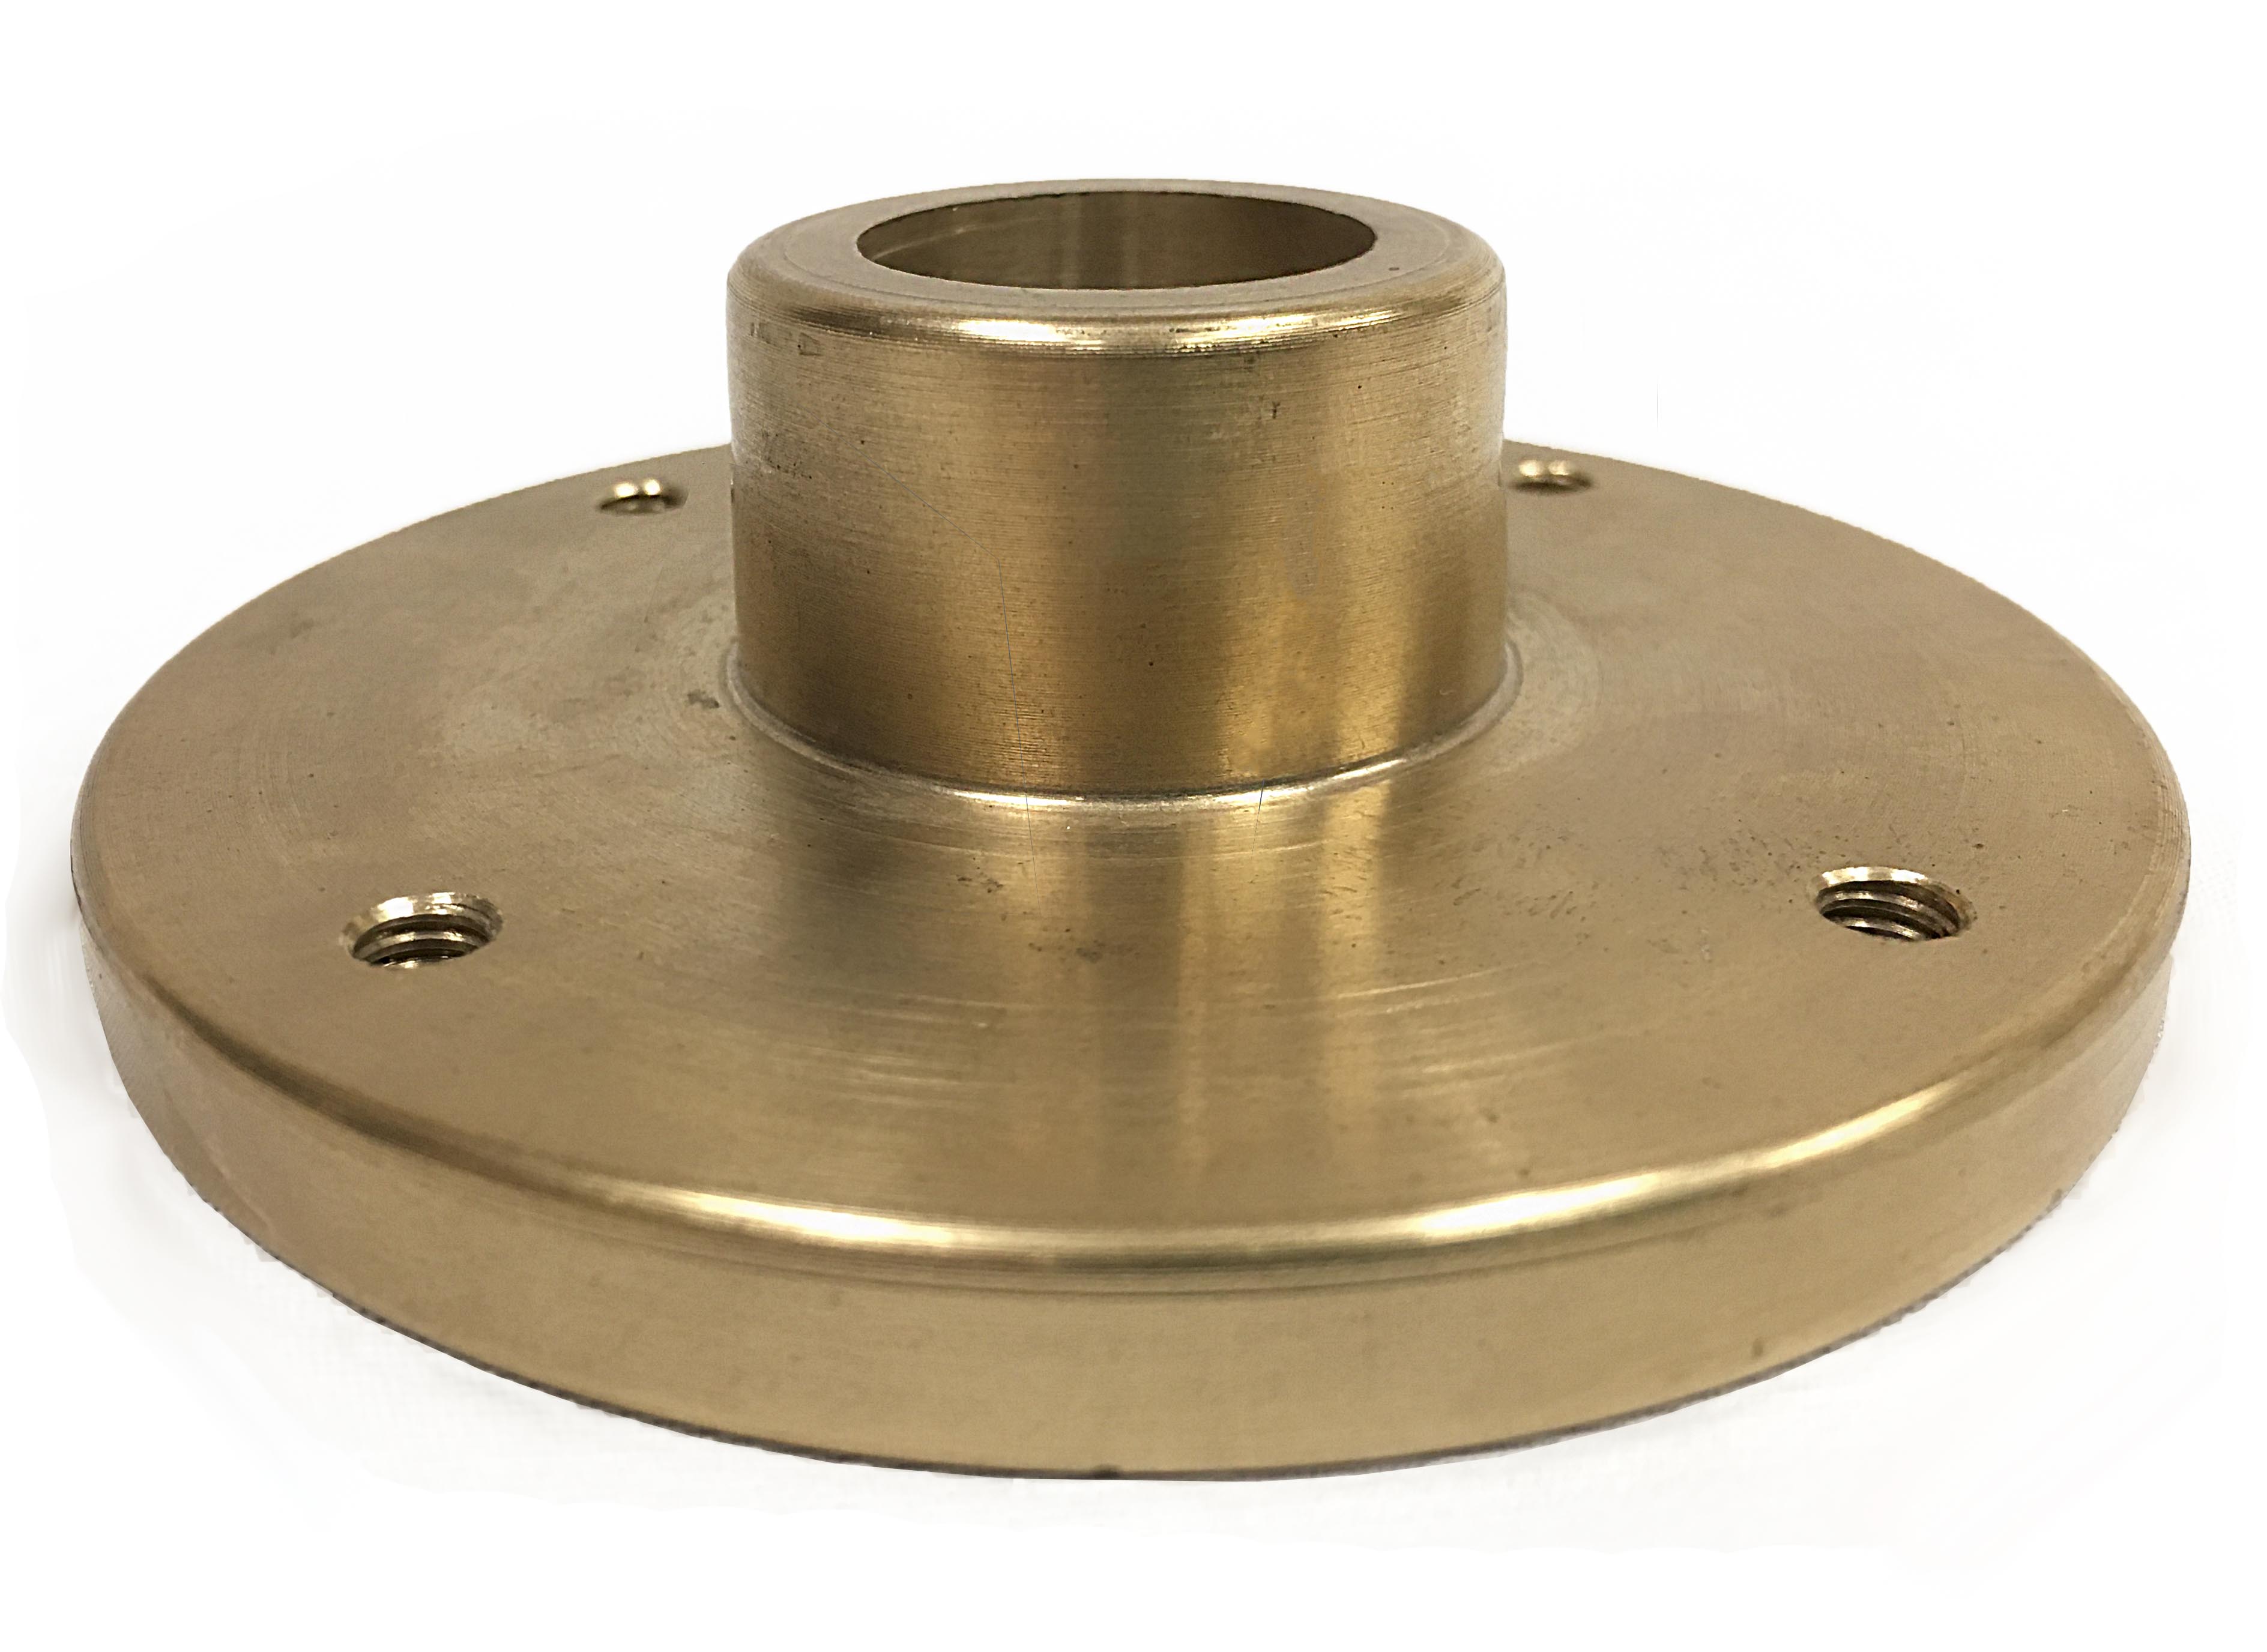 Machined Part - Bronze bushing: 4 in. O.D. x ⅜ in. thick—hub 1 ½ in. O.D. x 1 in. I.D. x 27/32 in. LG.—overall 1 7/32 in. LG.